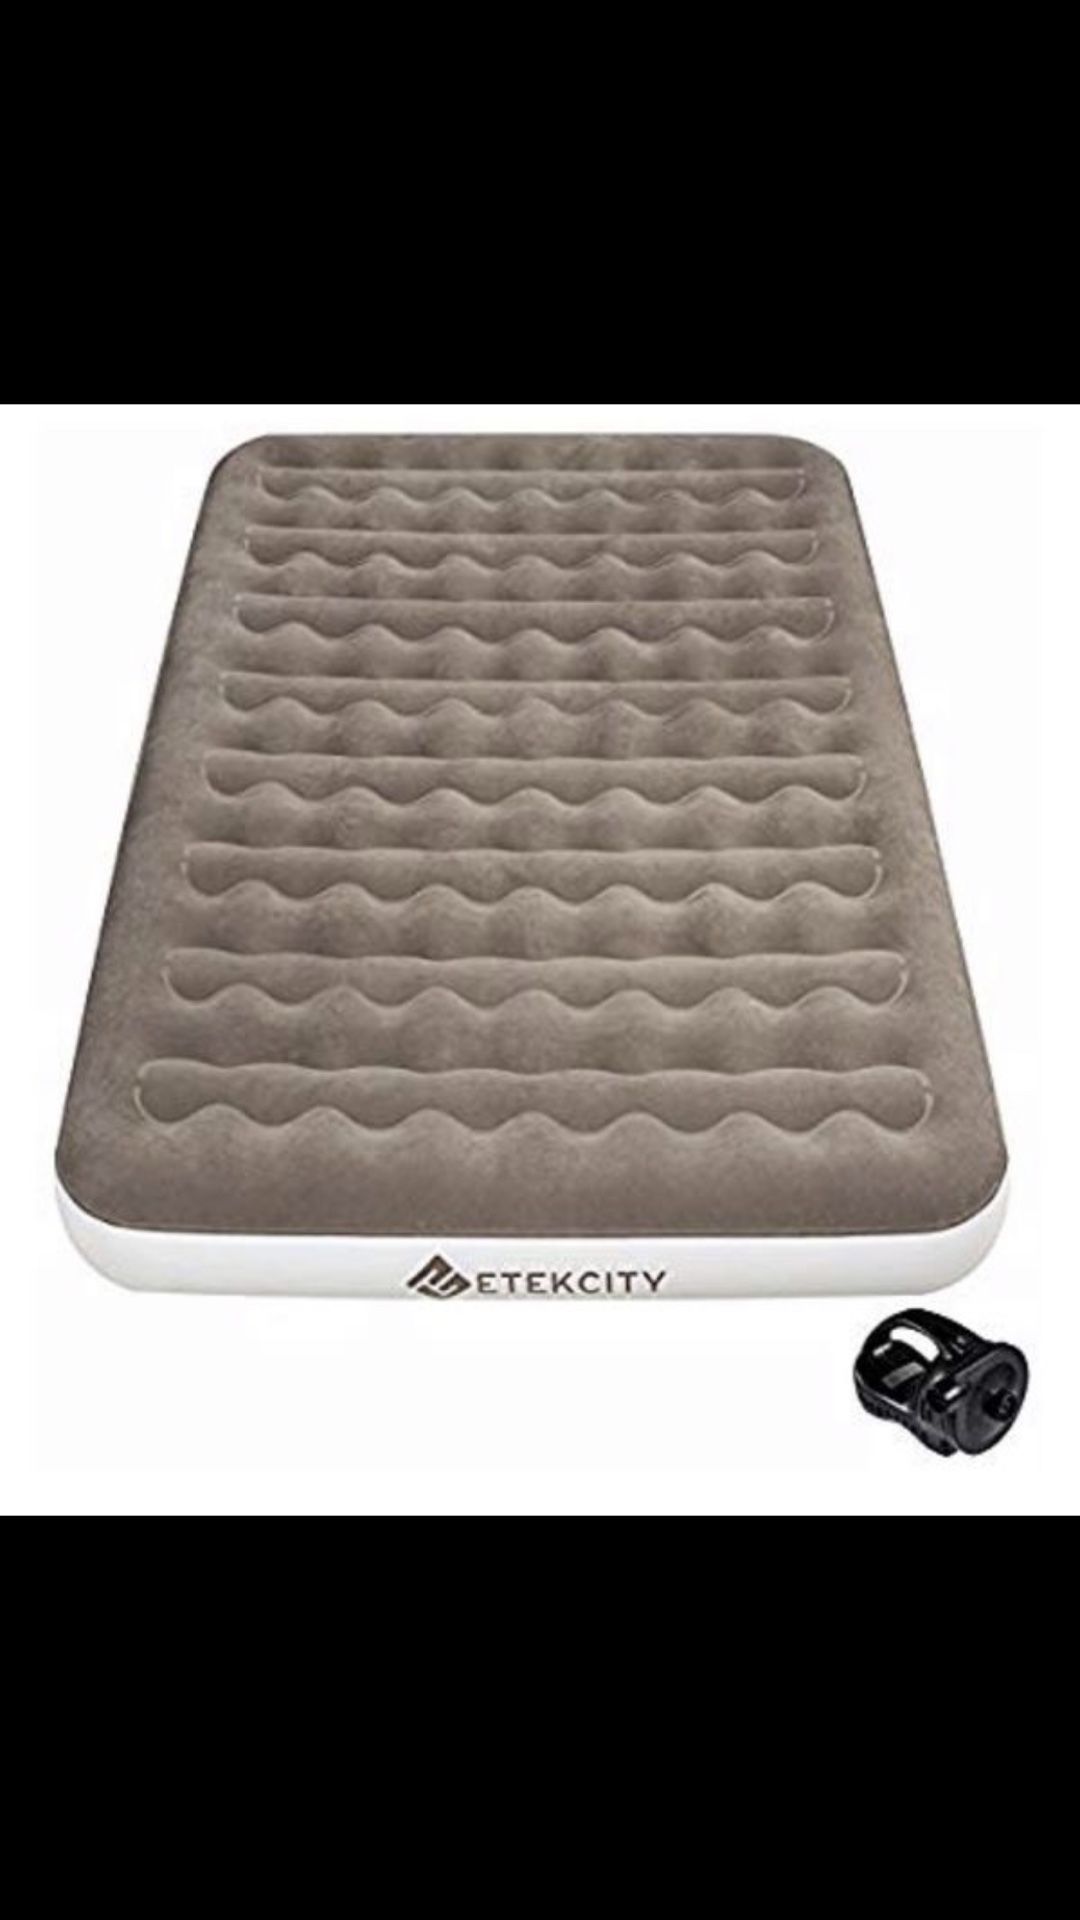 ETEKCITY air mattress Twin and Queen sizes available 10.00 ea